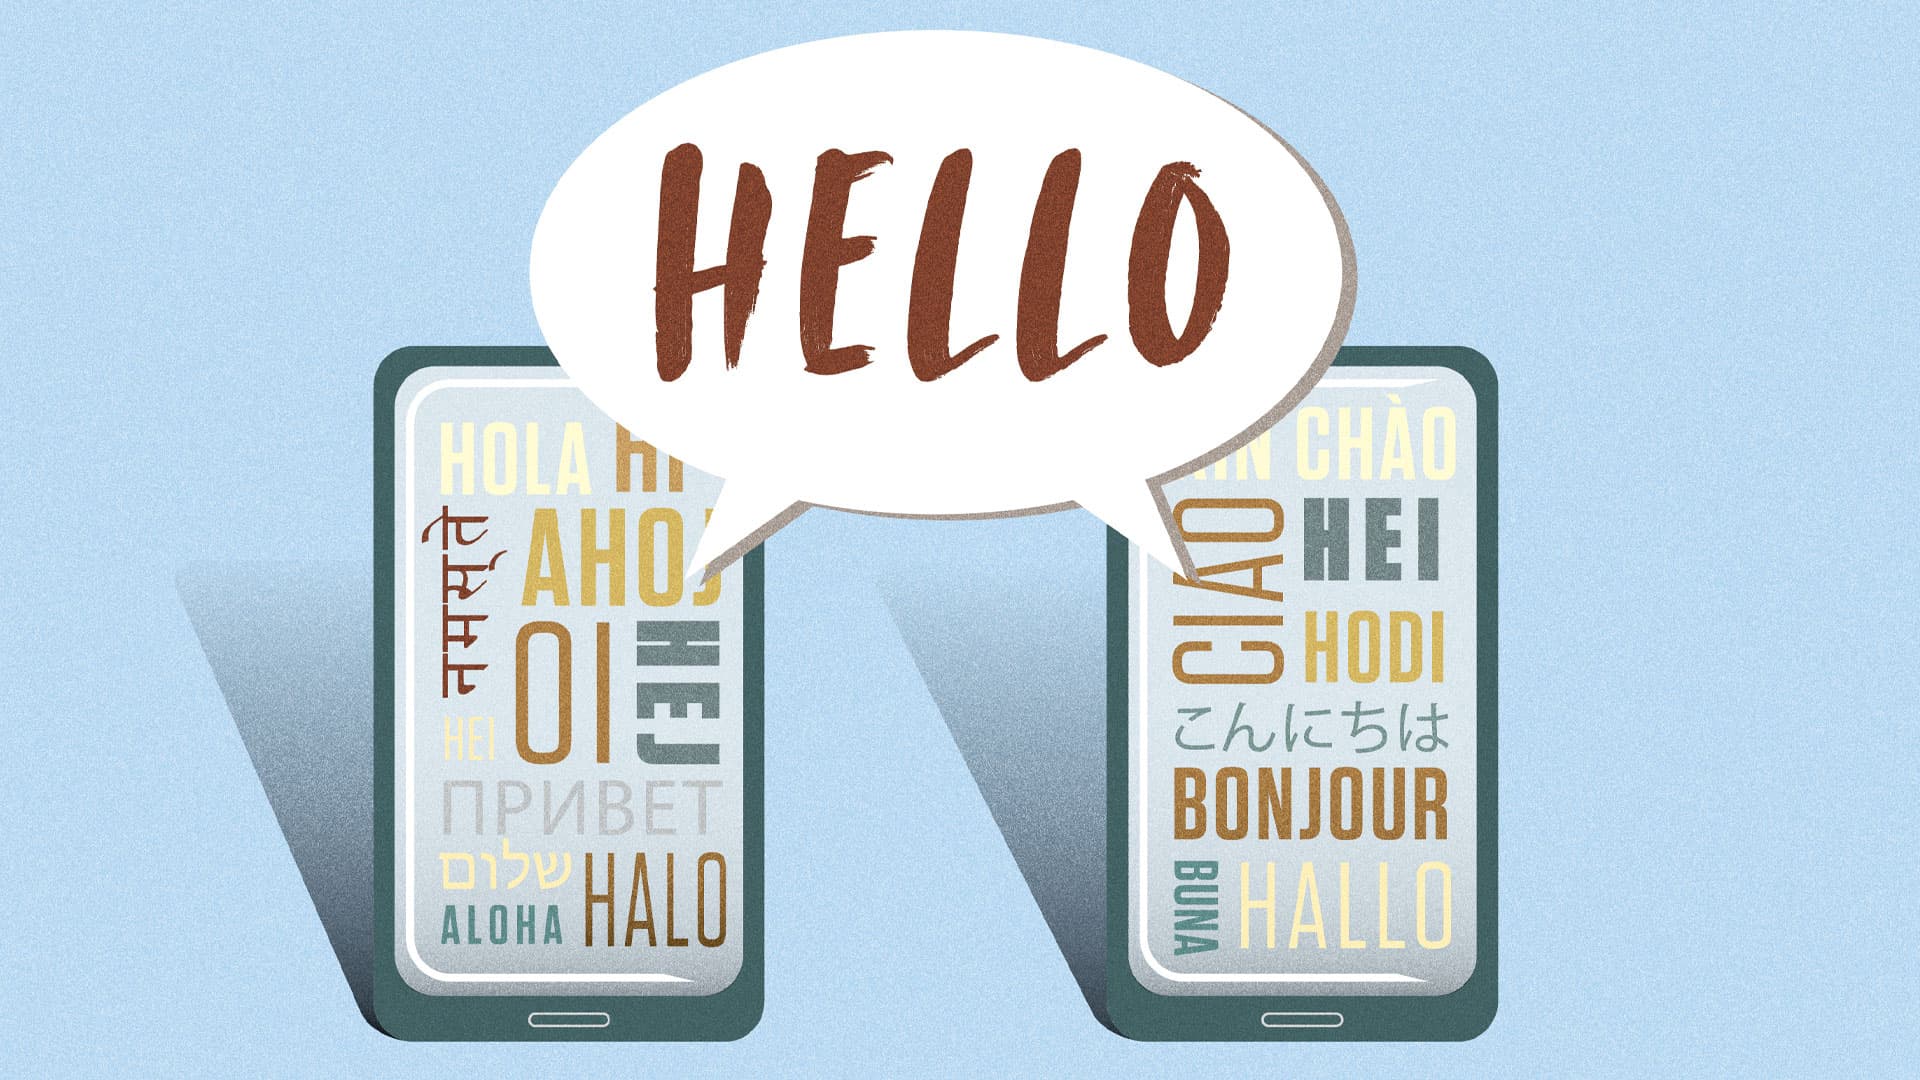 Illustration of two smartphones saying "Hello" in different languages